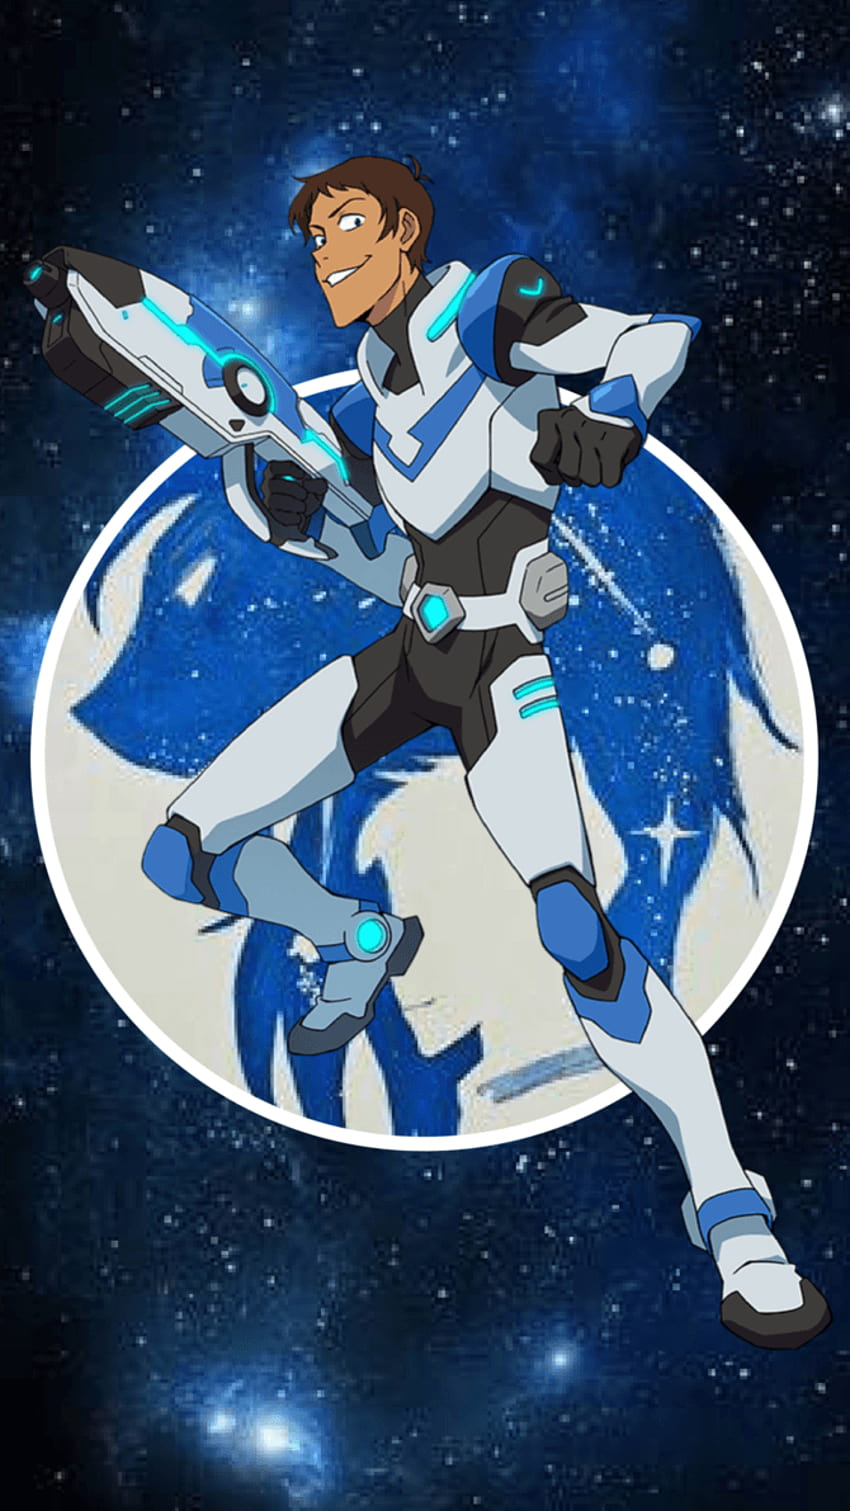 Lance the Blue Paladin of the Blue Lion of Voltron from Voltron, voltron legendary defender phone HD phone wallpaper